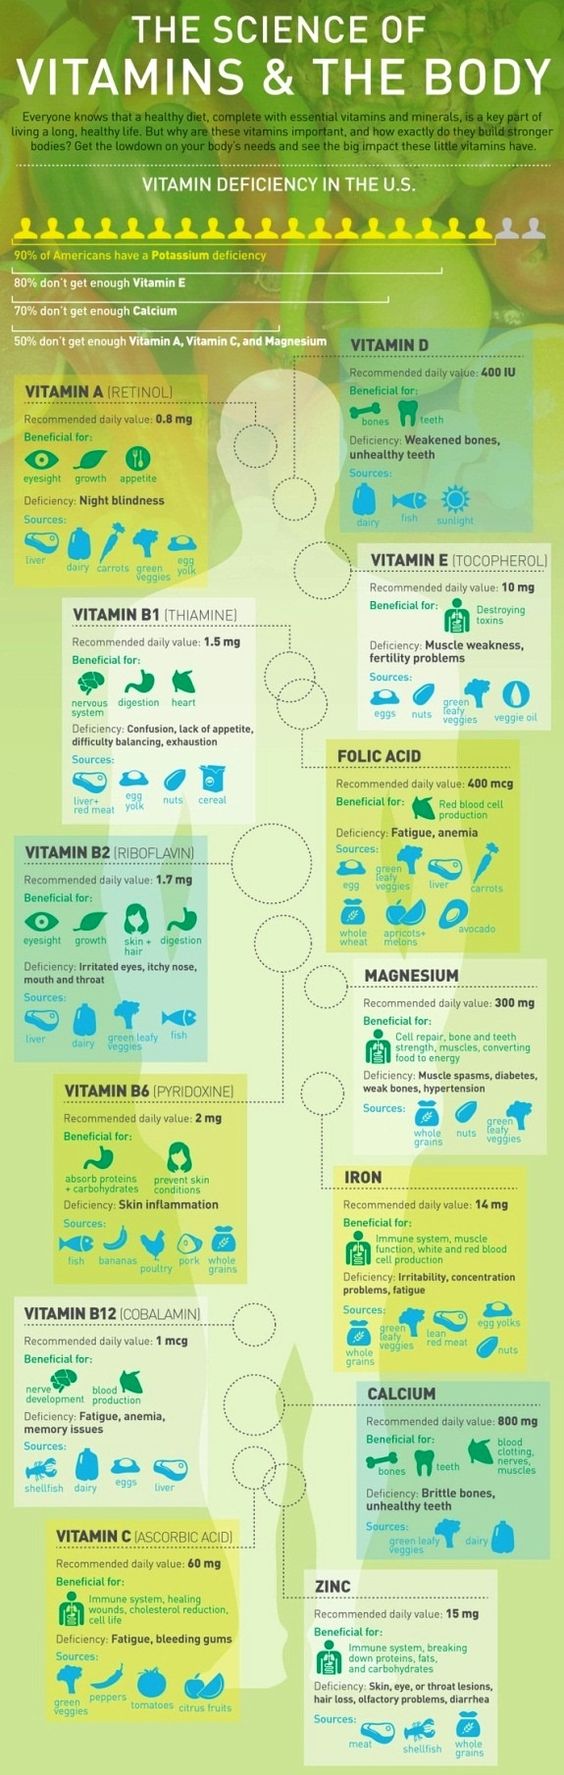 The Science of Vitamins